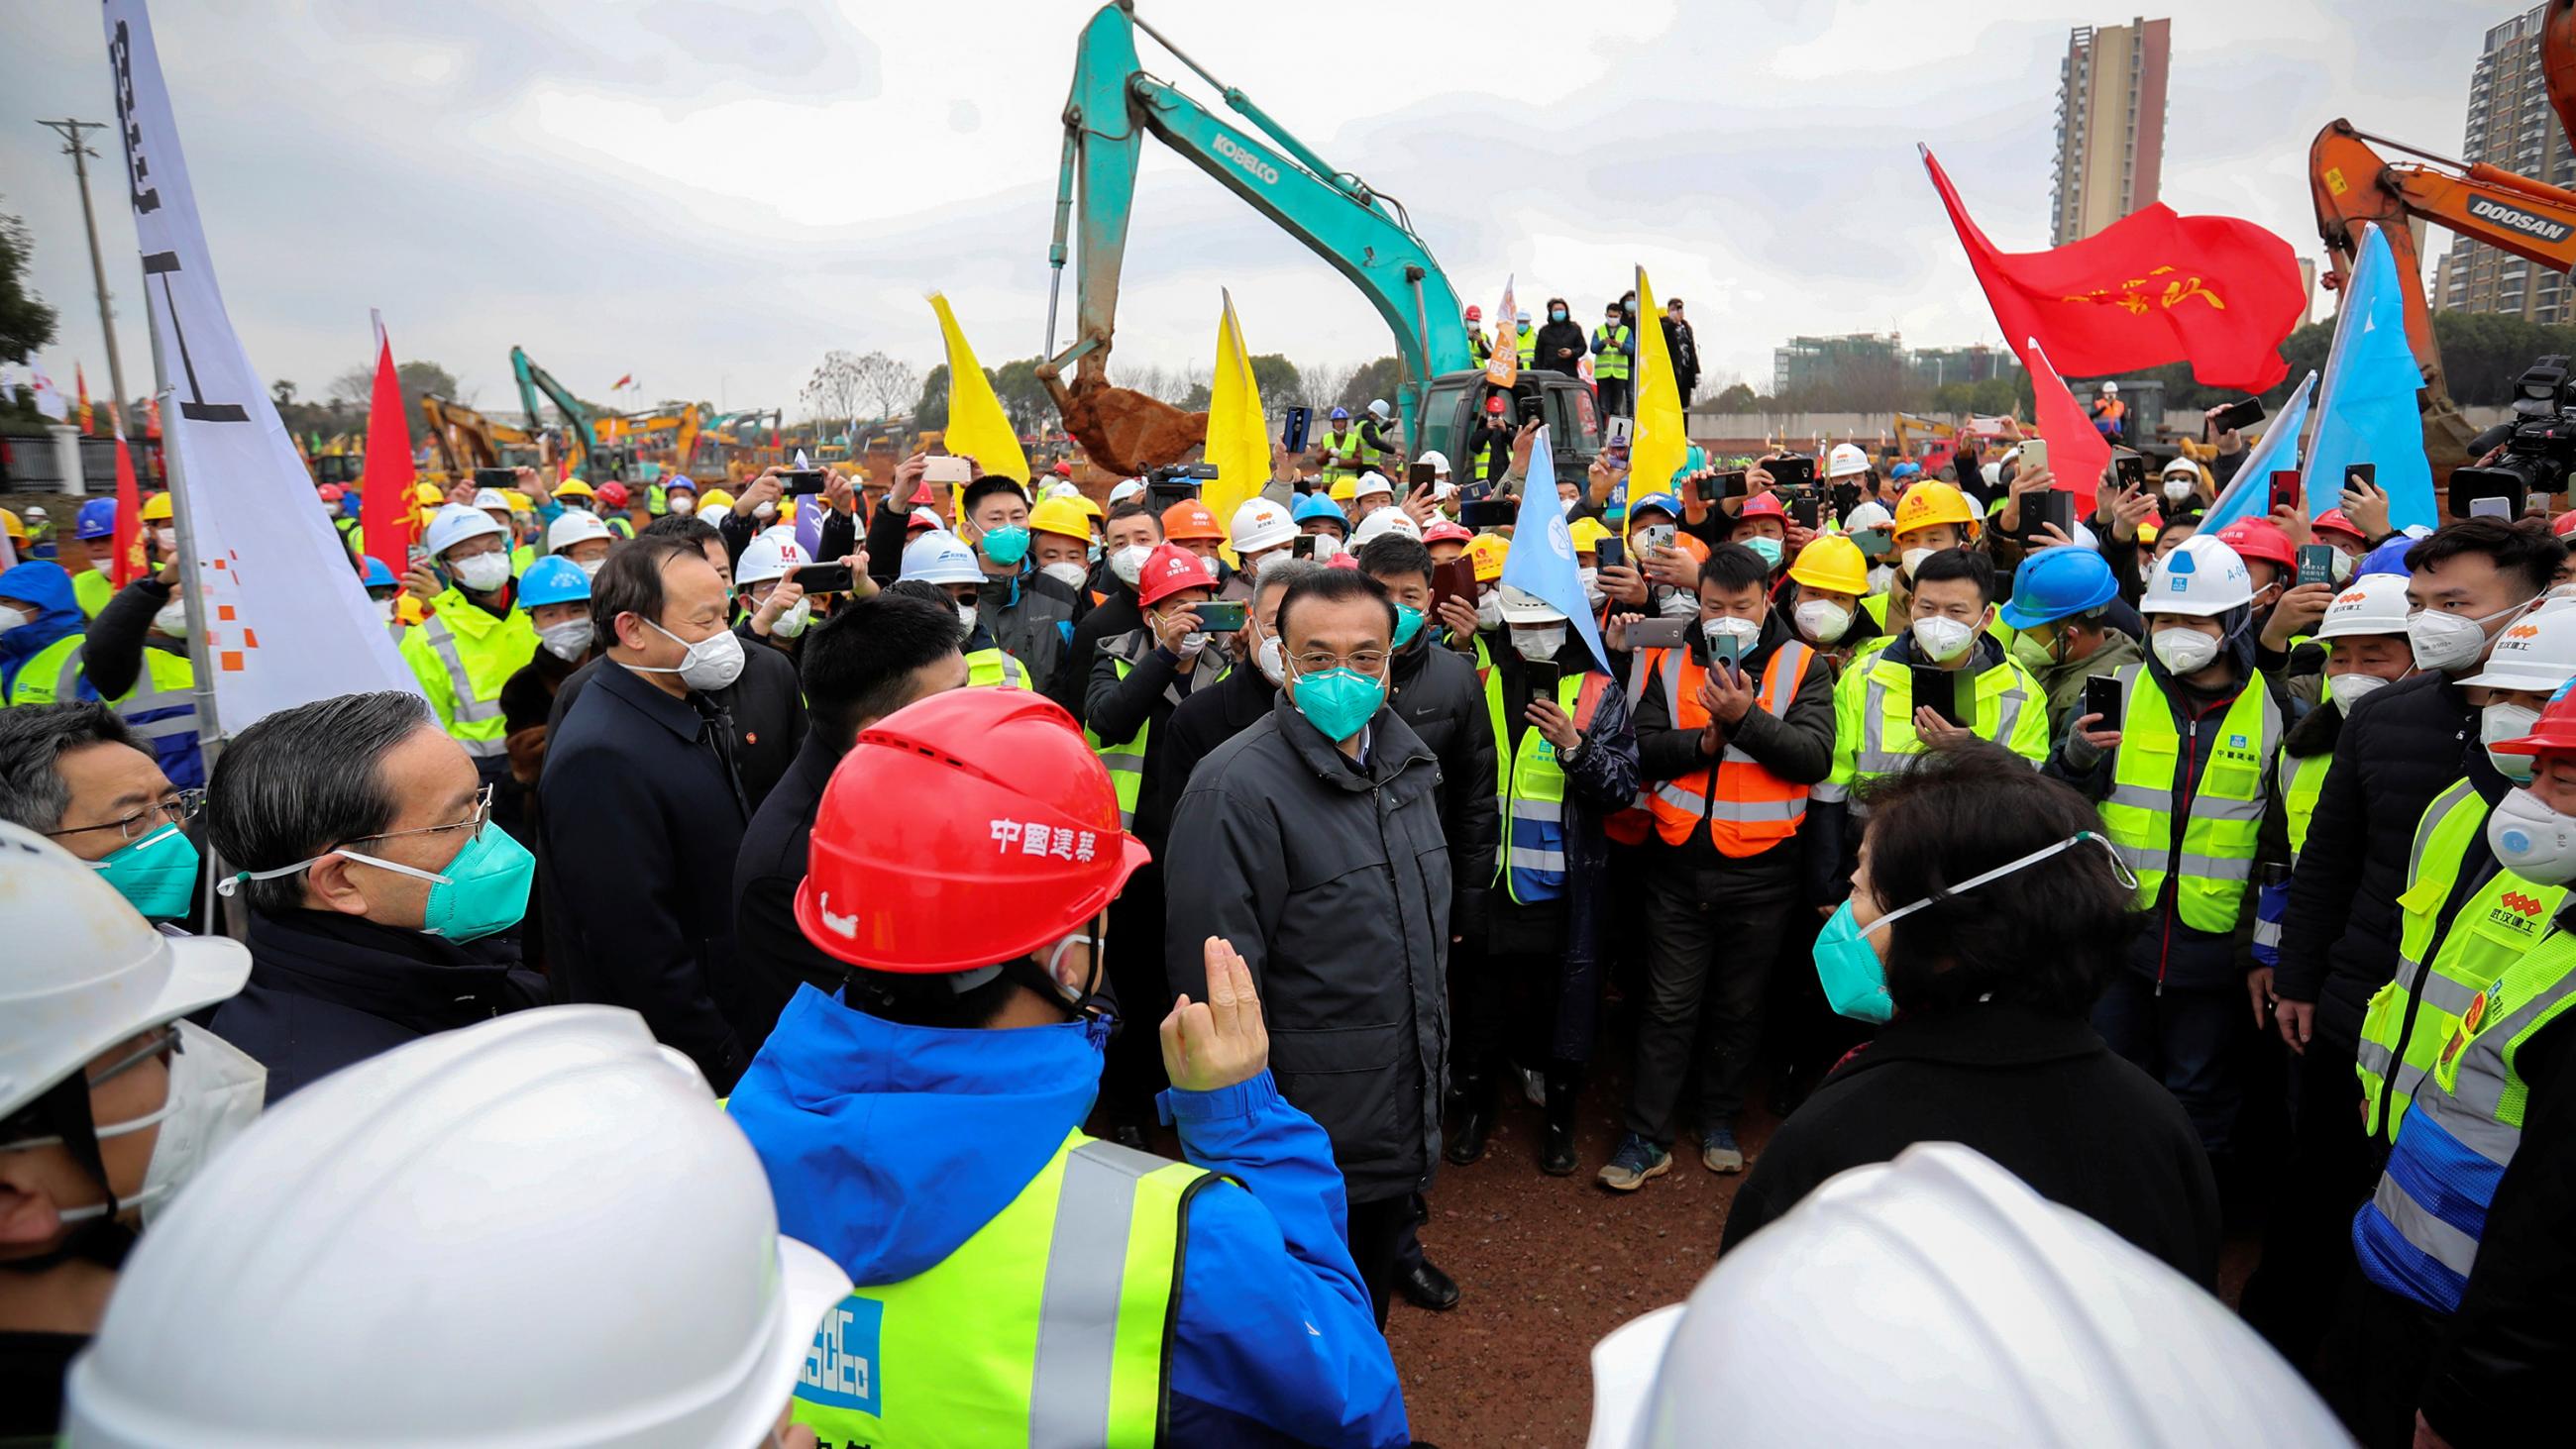 Photo shows the leader surrounded by construction workers and other people at the construction site with huge cranes looming in the background. 